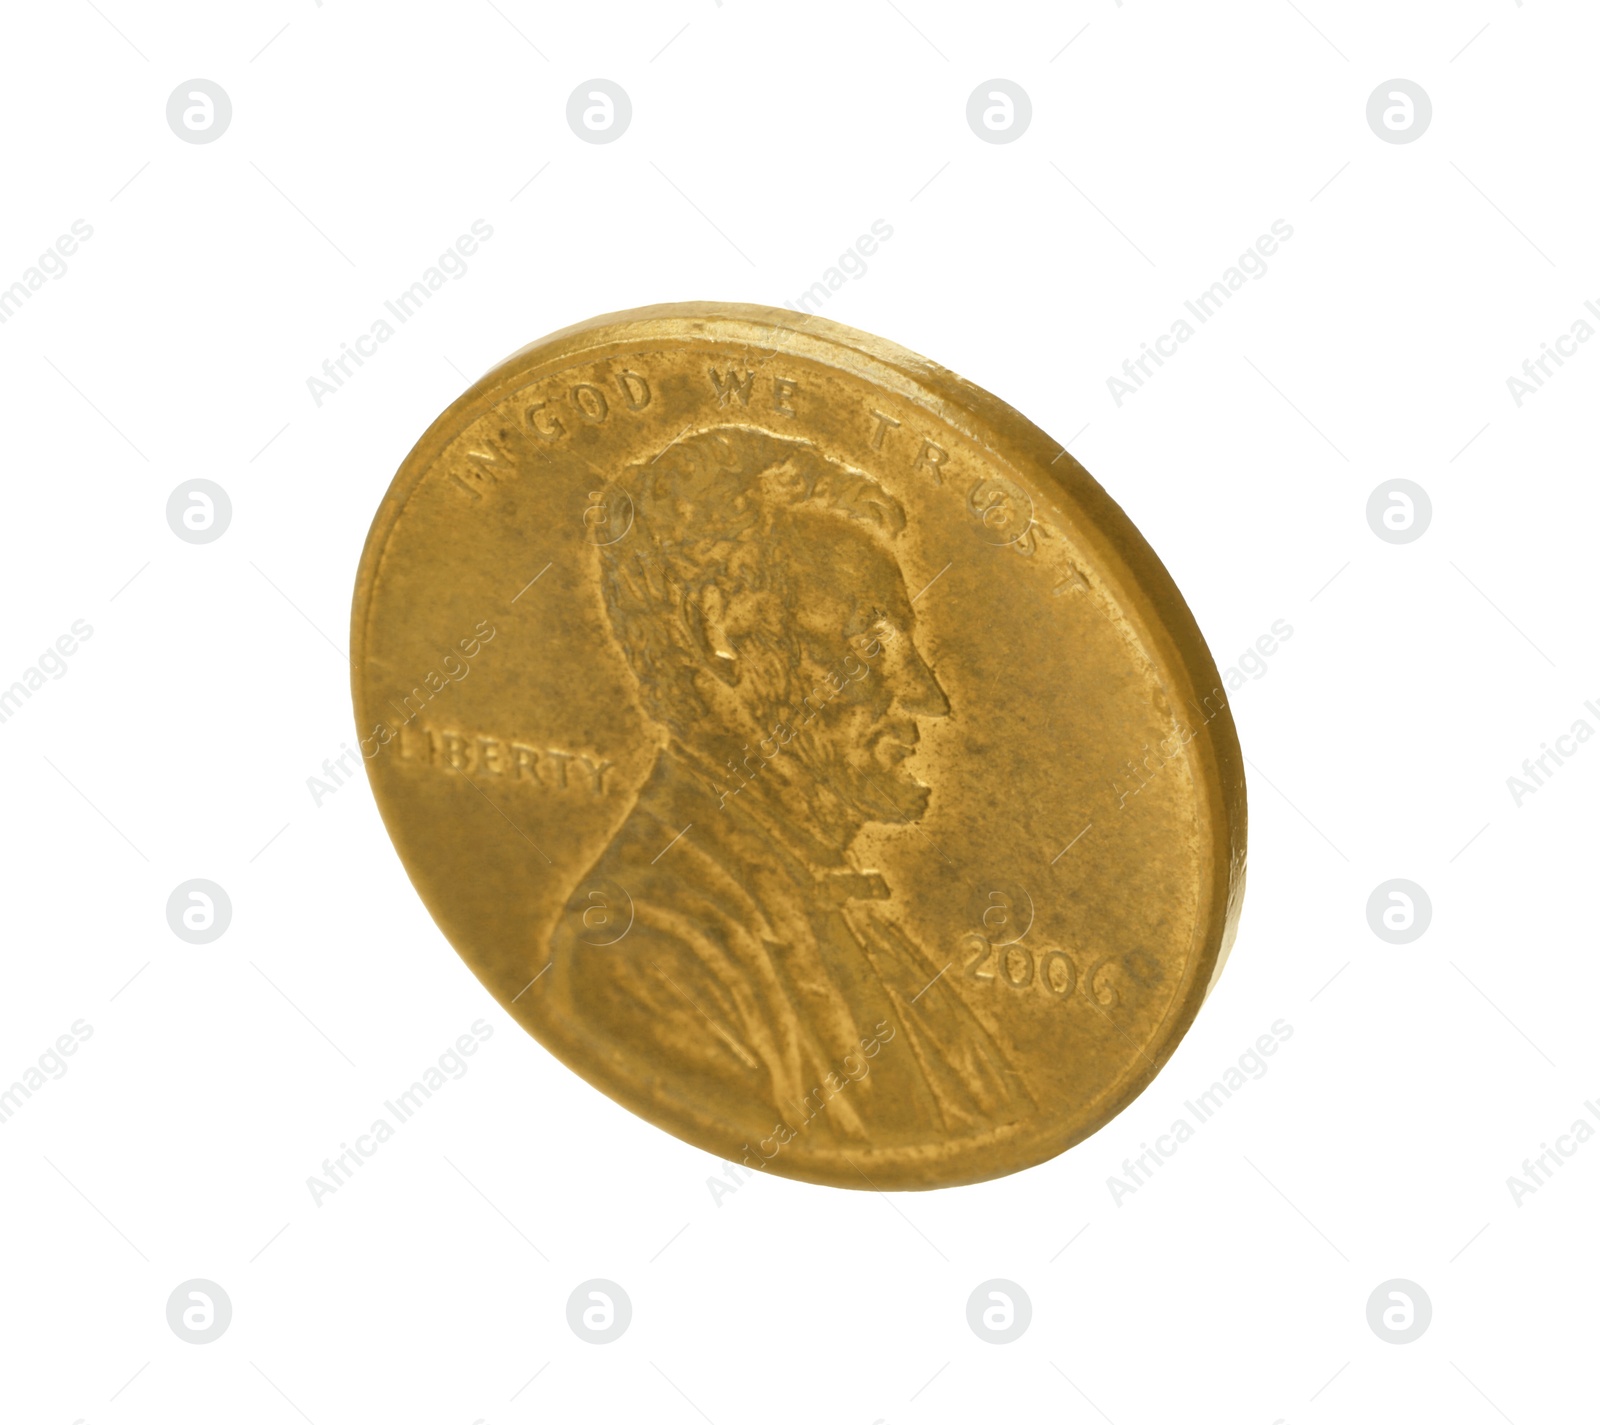 Photo of American one cent coin isolated on white